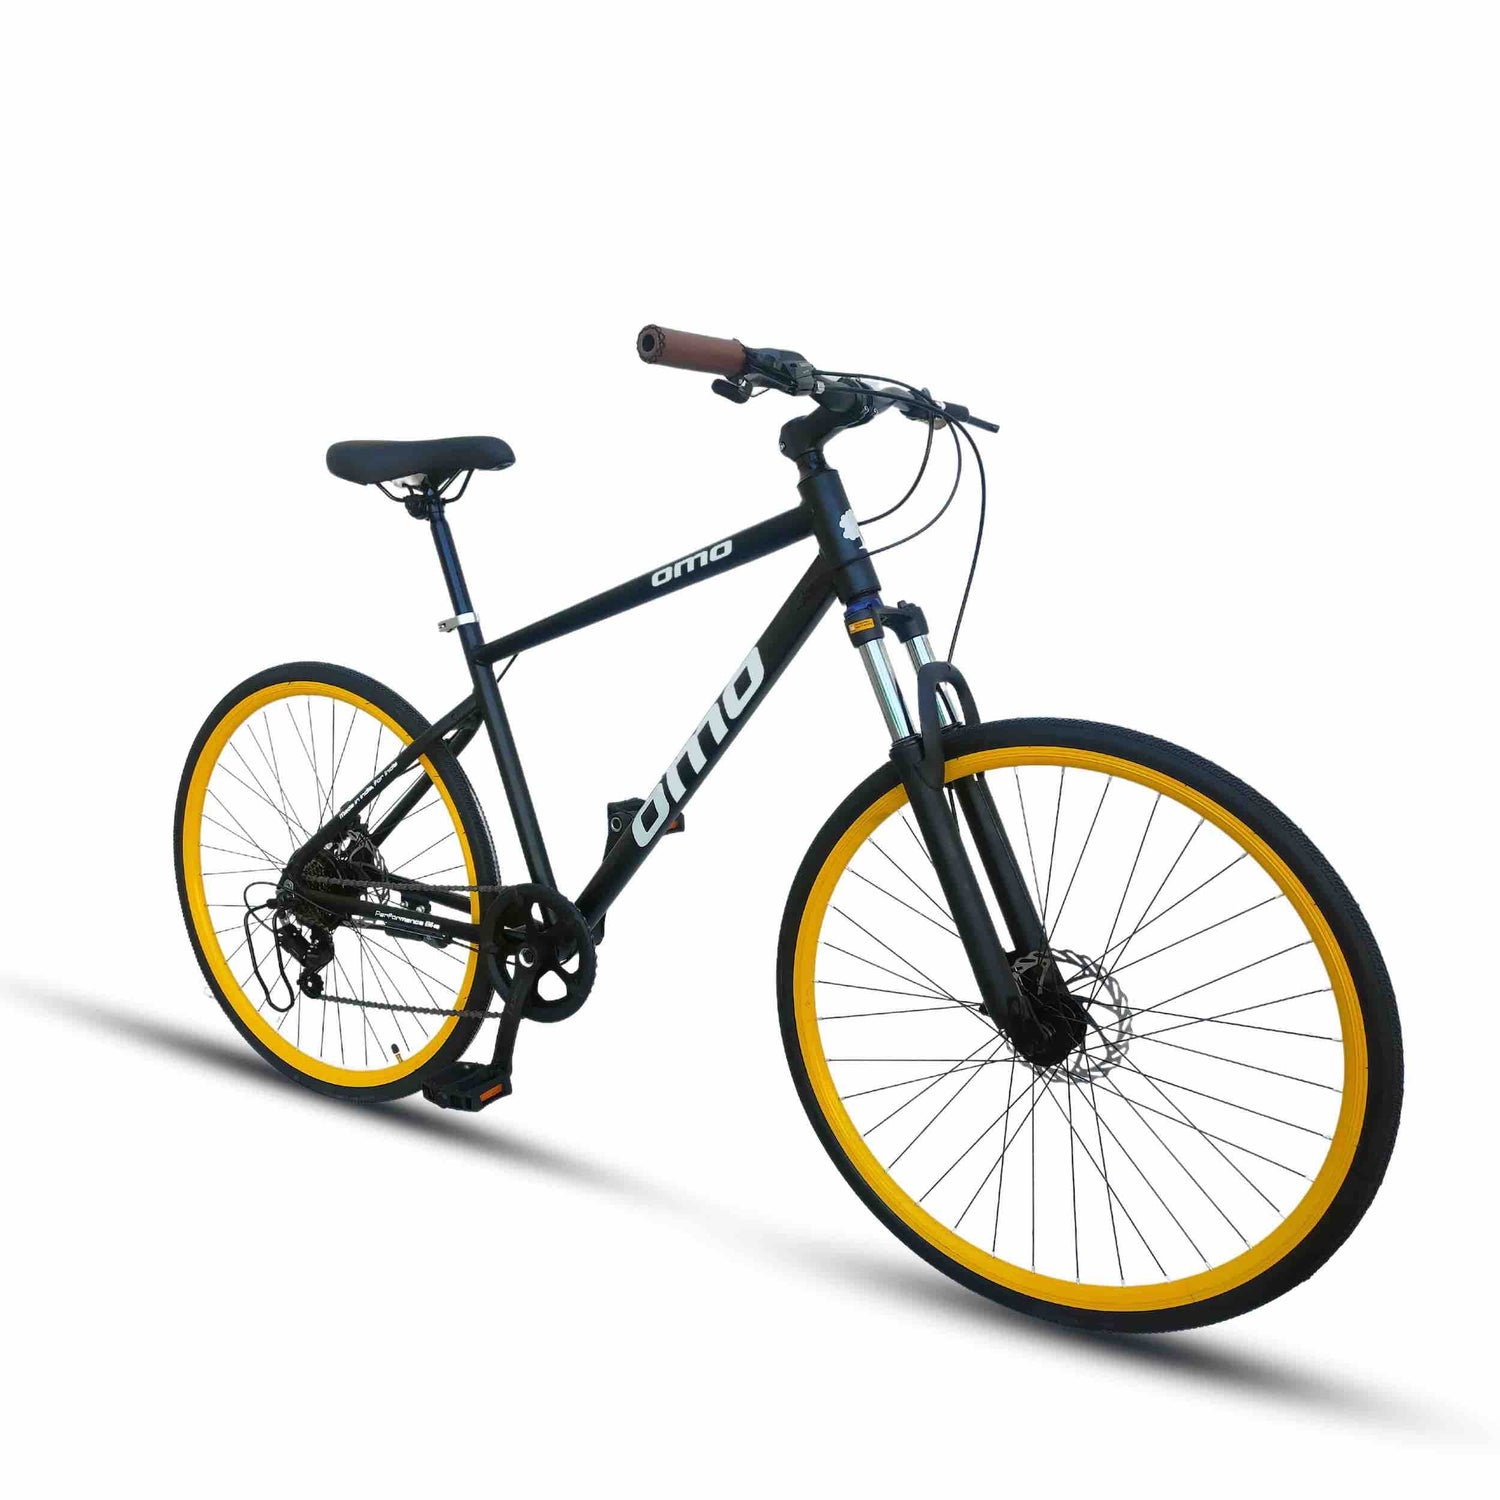 Hybrid city bicycles for men women and adult  , alloy frame with gear and suspension 